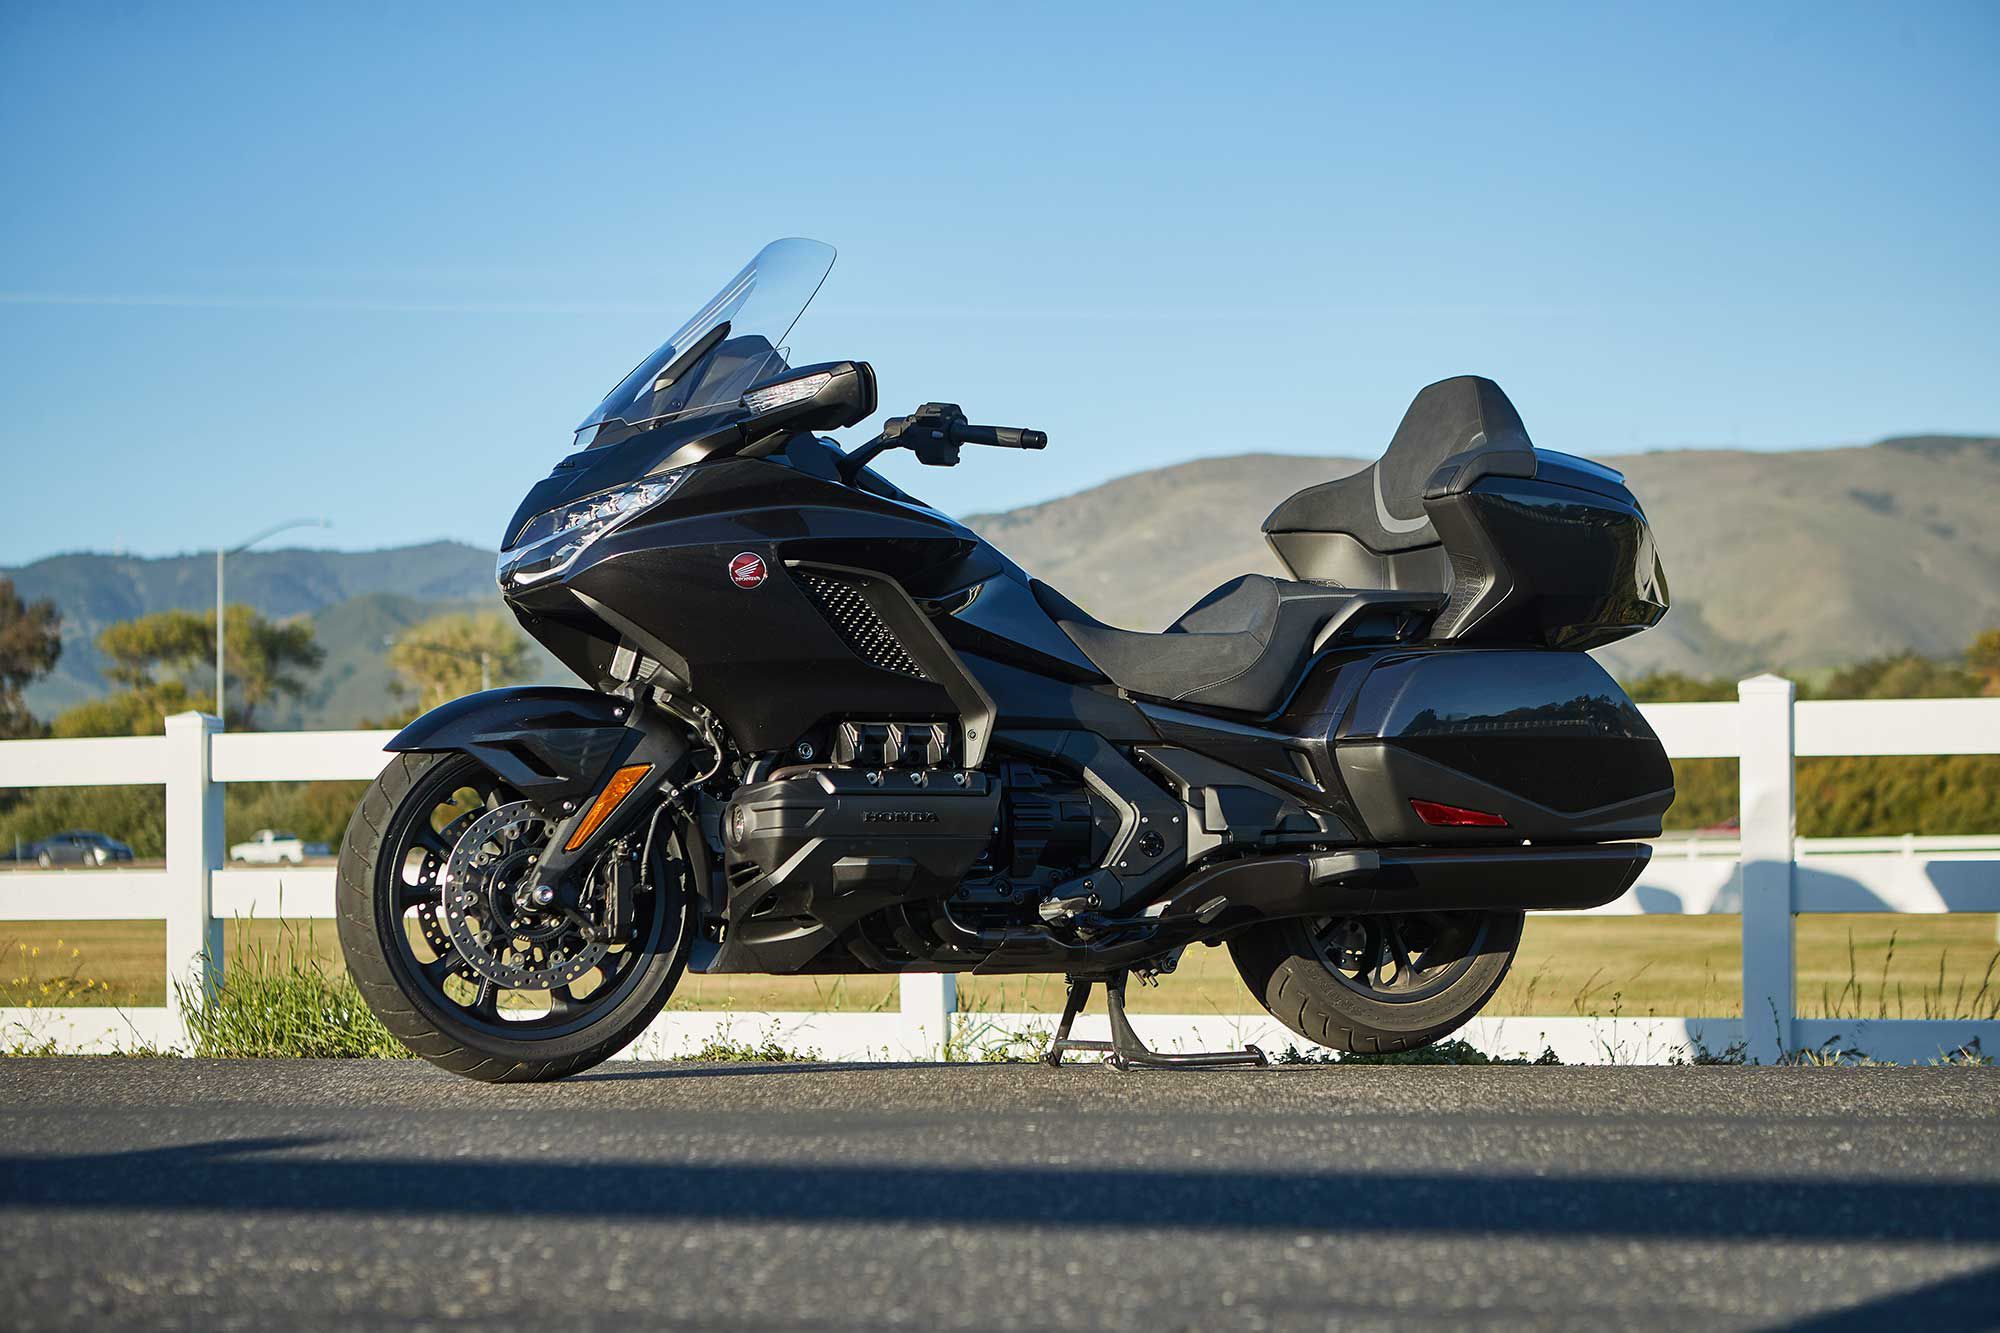 Honda’s $29,300 Tour DCT impresses not only with its touring credentials, but with its versatility. This is a do-it-all street bike.